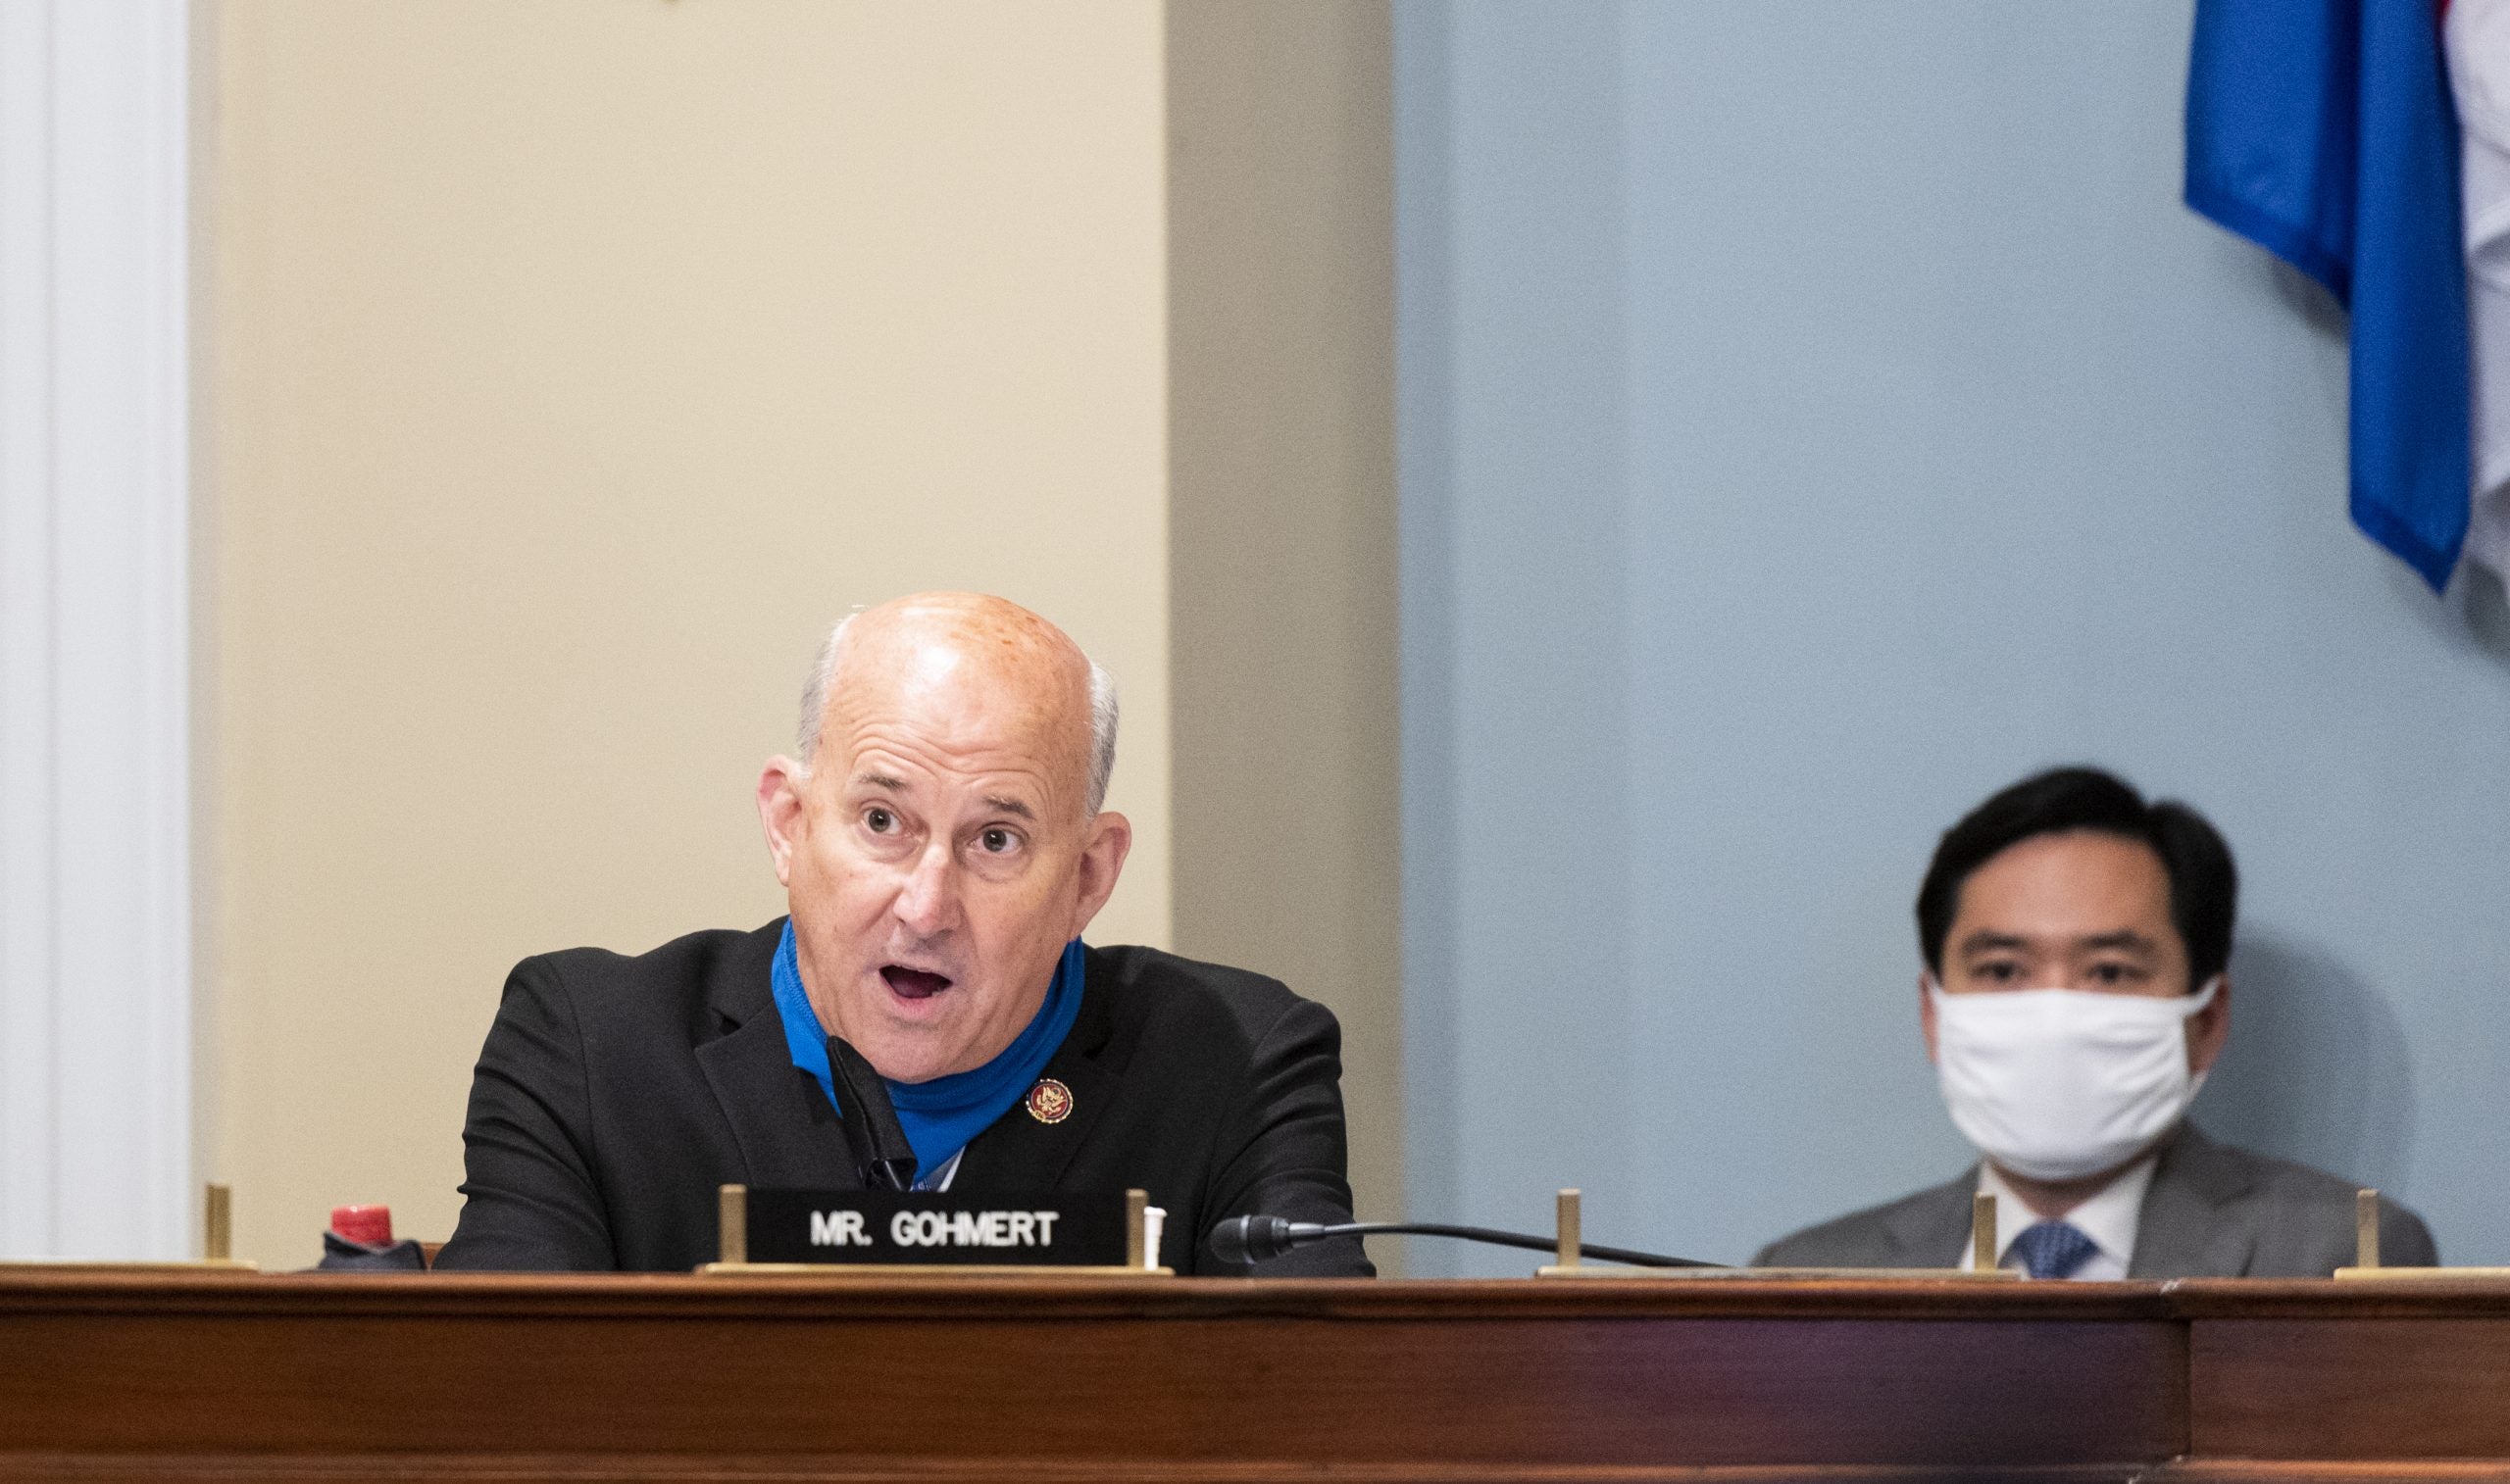 Rep. Louie Gohmert, Who Was Often Seen Without Mask, Tests Positive For COVID